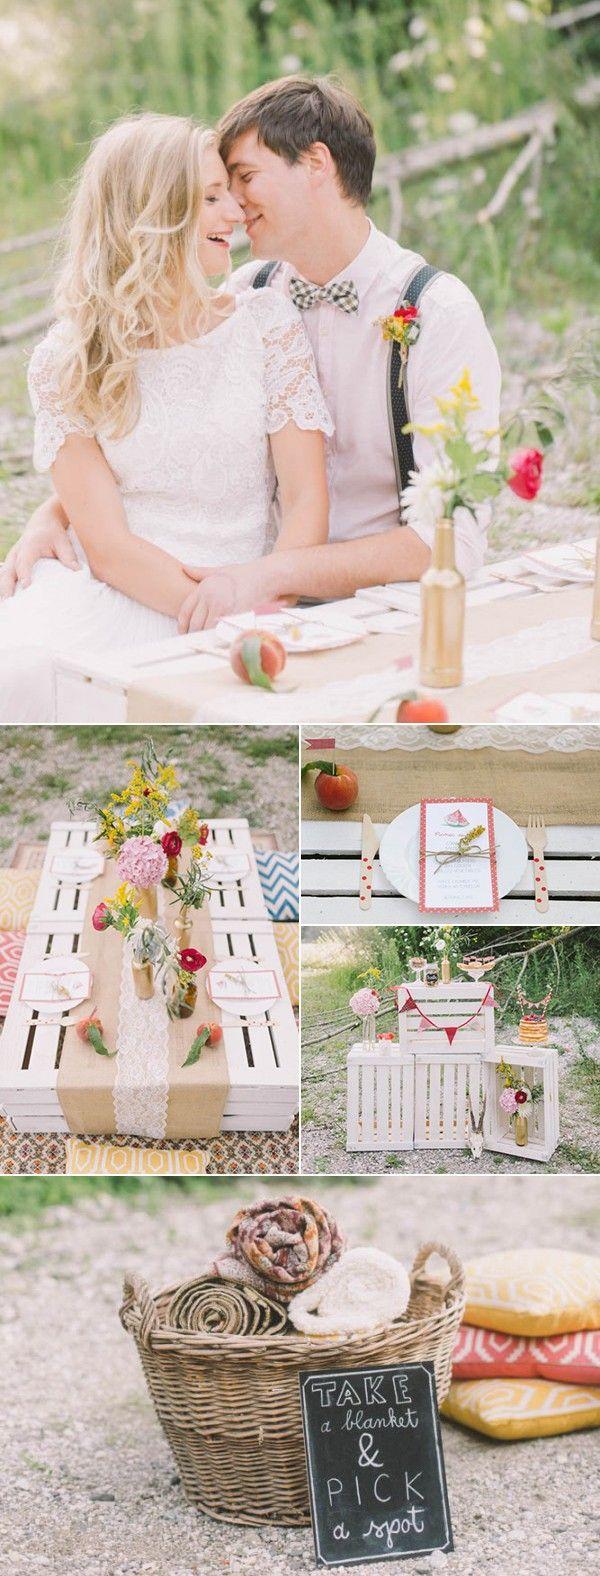 Wedding - 5 Of Our Favorite Picnic Weddings To Inspire Your Summer Soirée